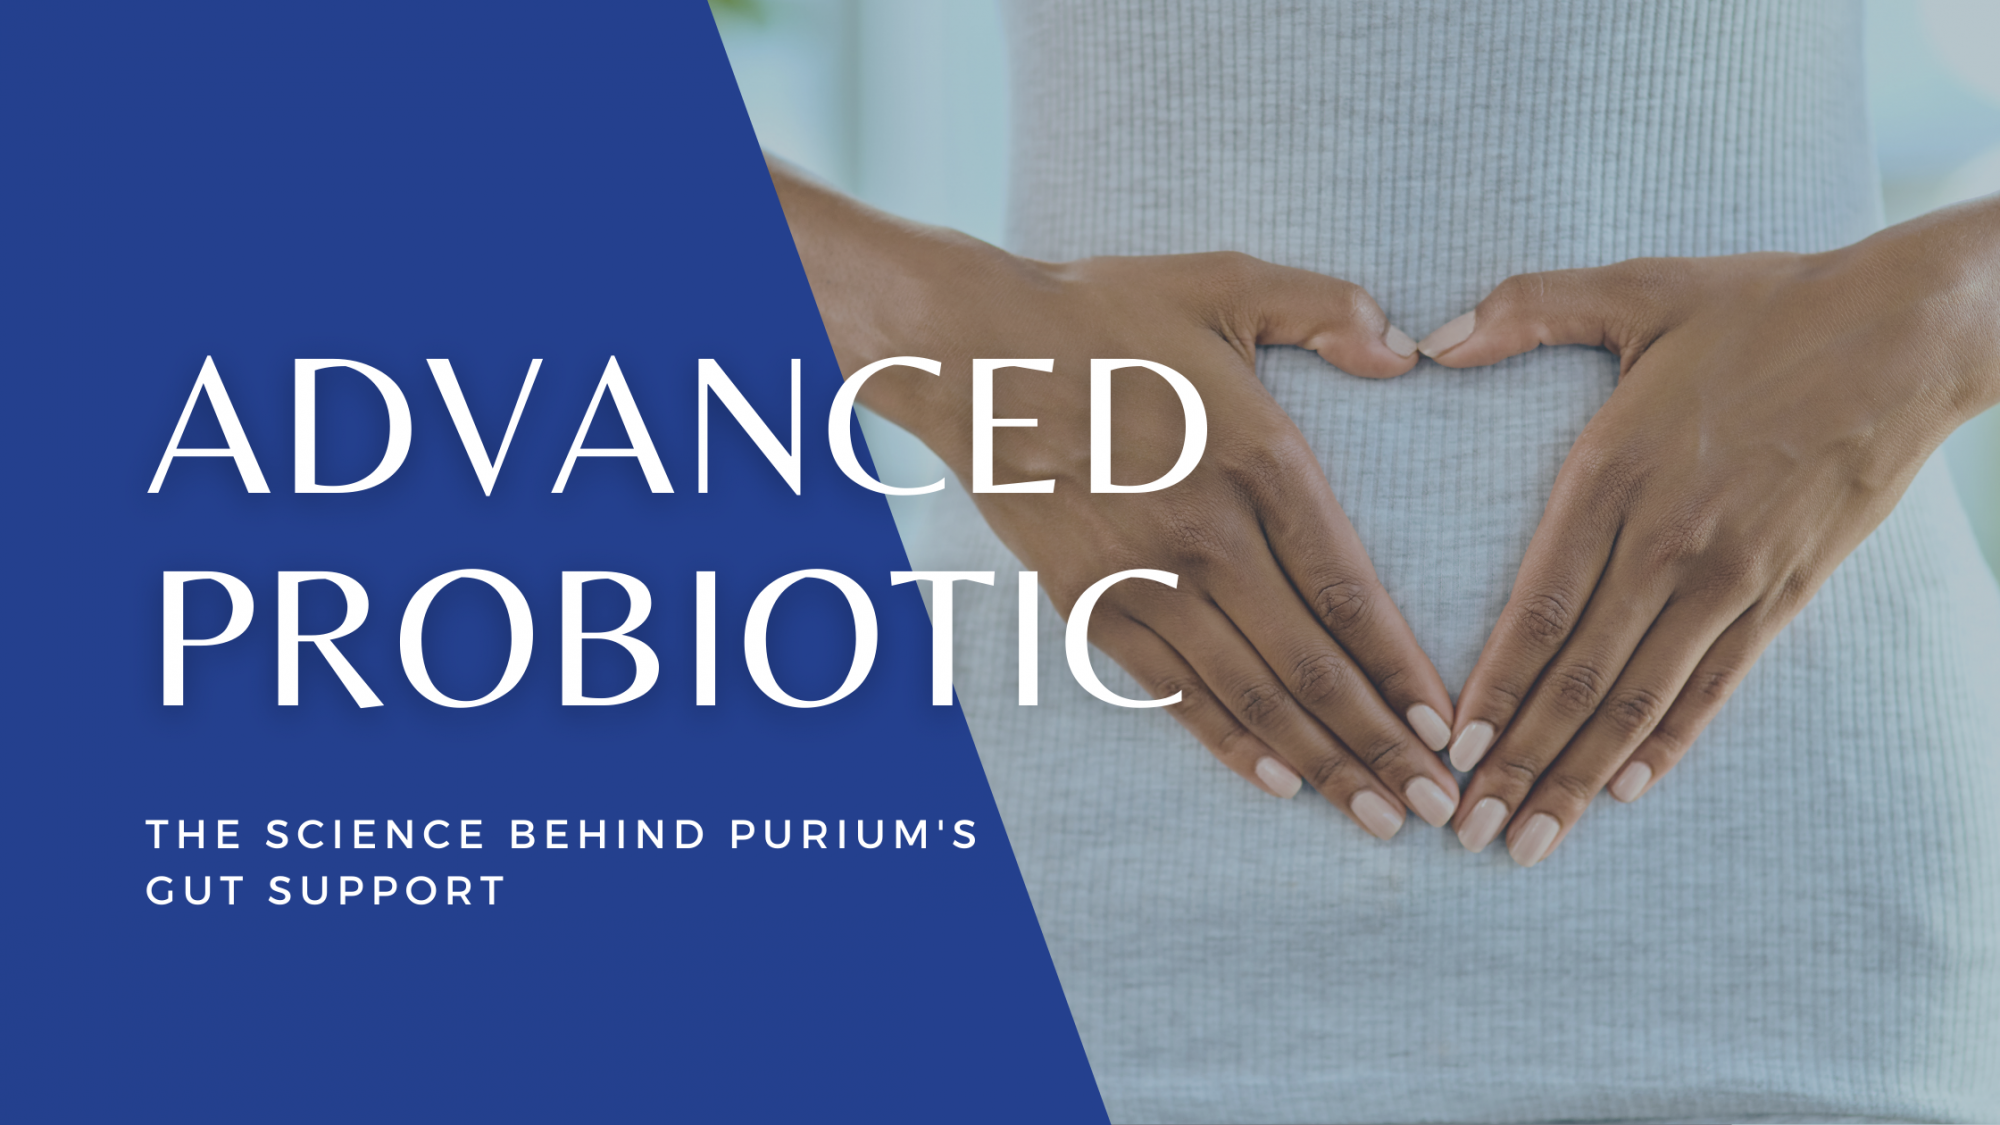 Advanced Probiotic: The Science Behind Purium’s Healthy Gut Support